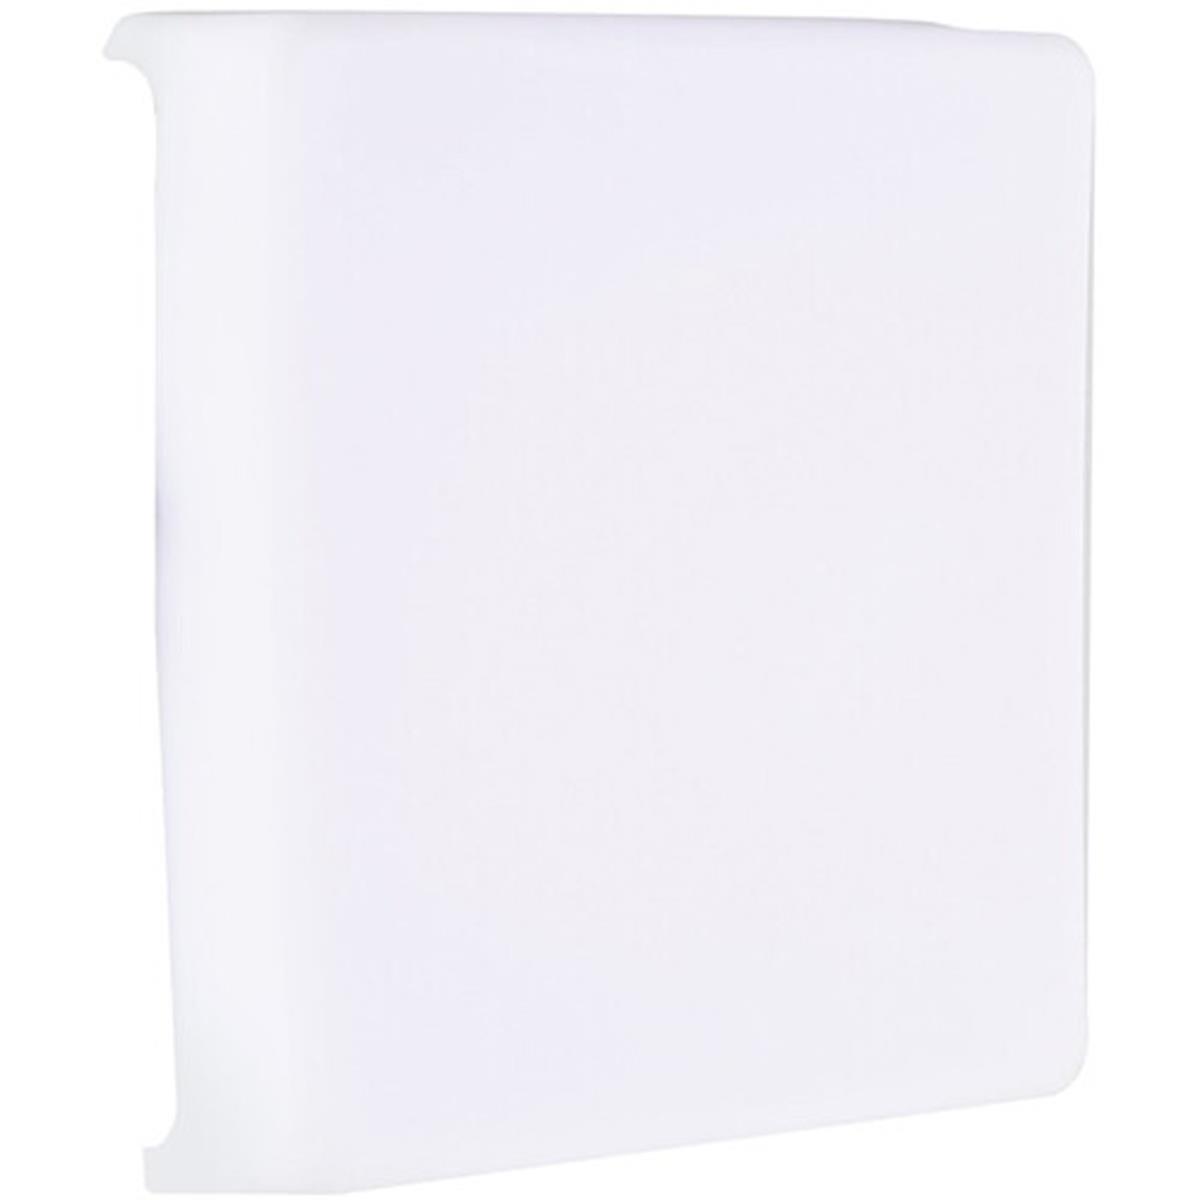 Image of GVM 80YU Silicone Diffuser for LED Video Lights